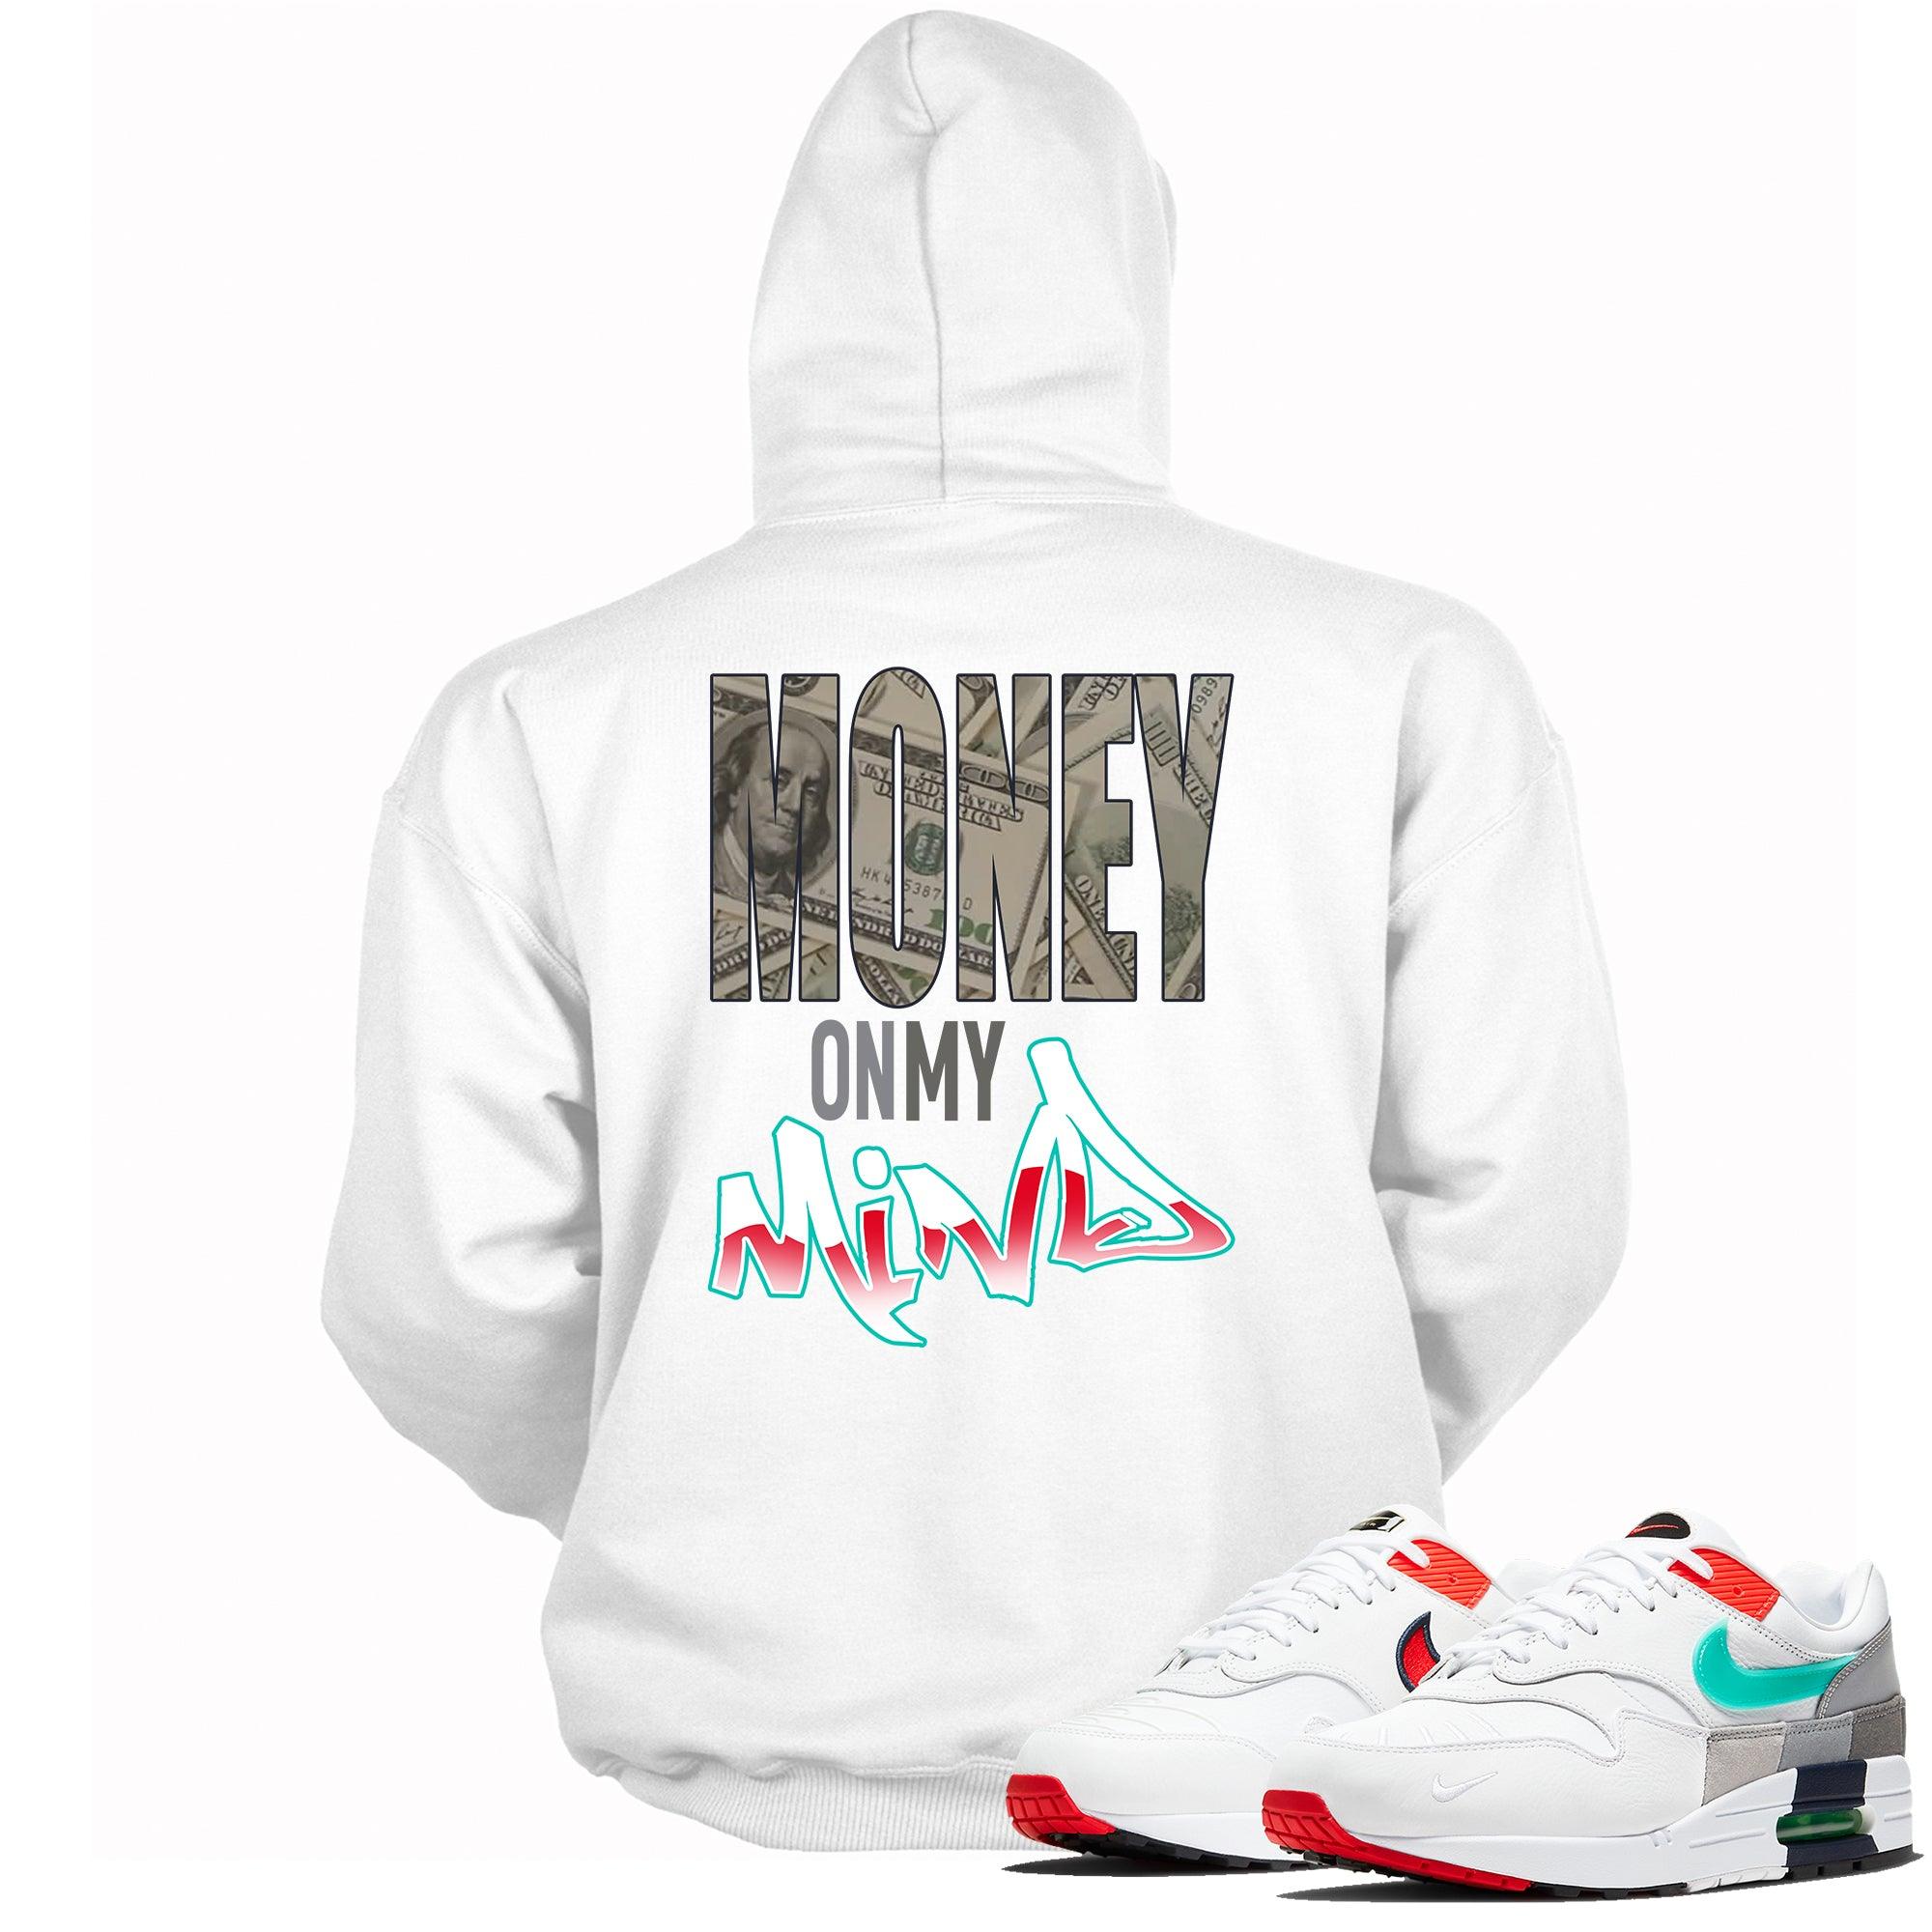 Money On My Mind Hoodie Nike Air Max 1 Evolution Of Icons photo